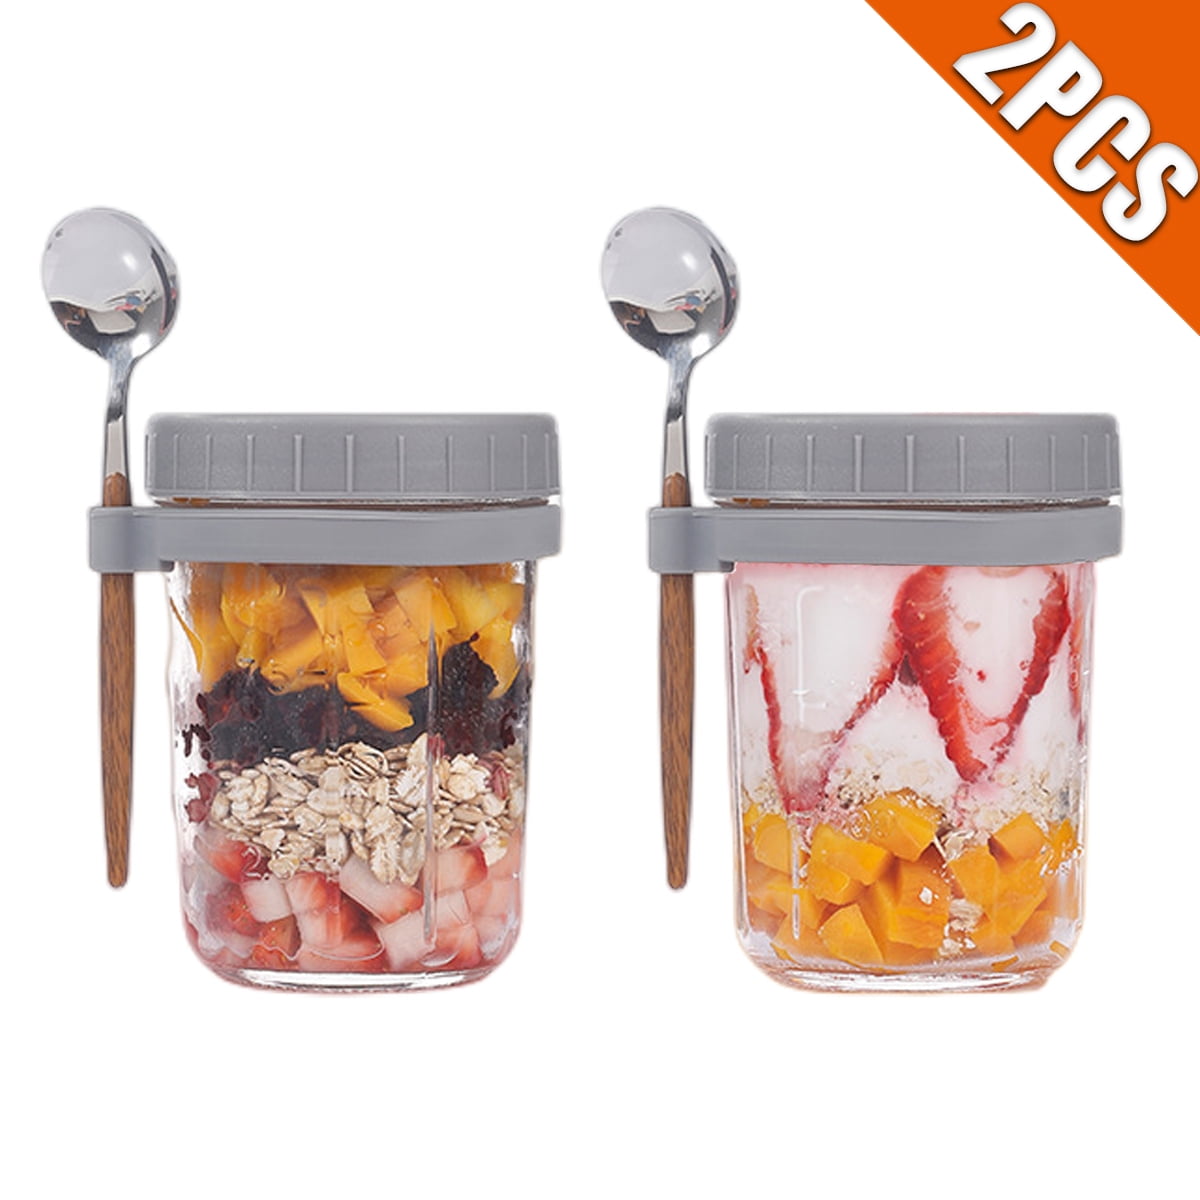 Luxshiny Meal Prep Jars, Yogurt Containers with Spoon Lid Straw and Carrier  Bag, Fruit Salad Storage Container for Breakfast Yogurt Oats Oats